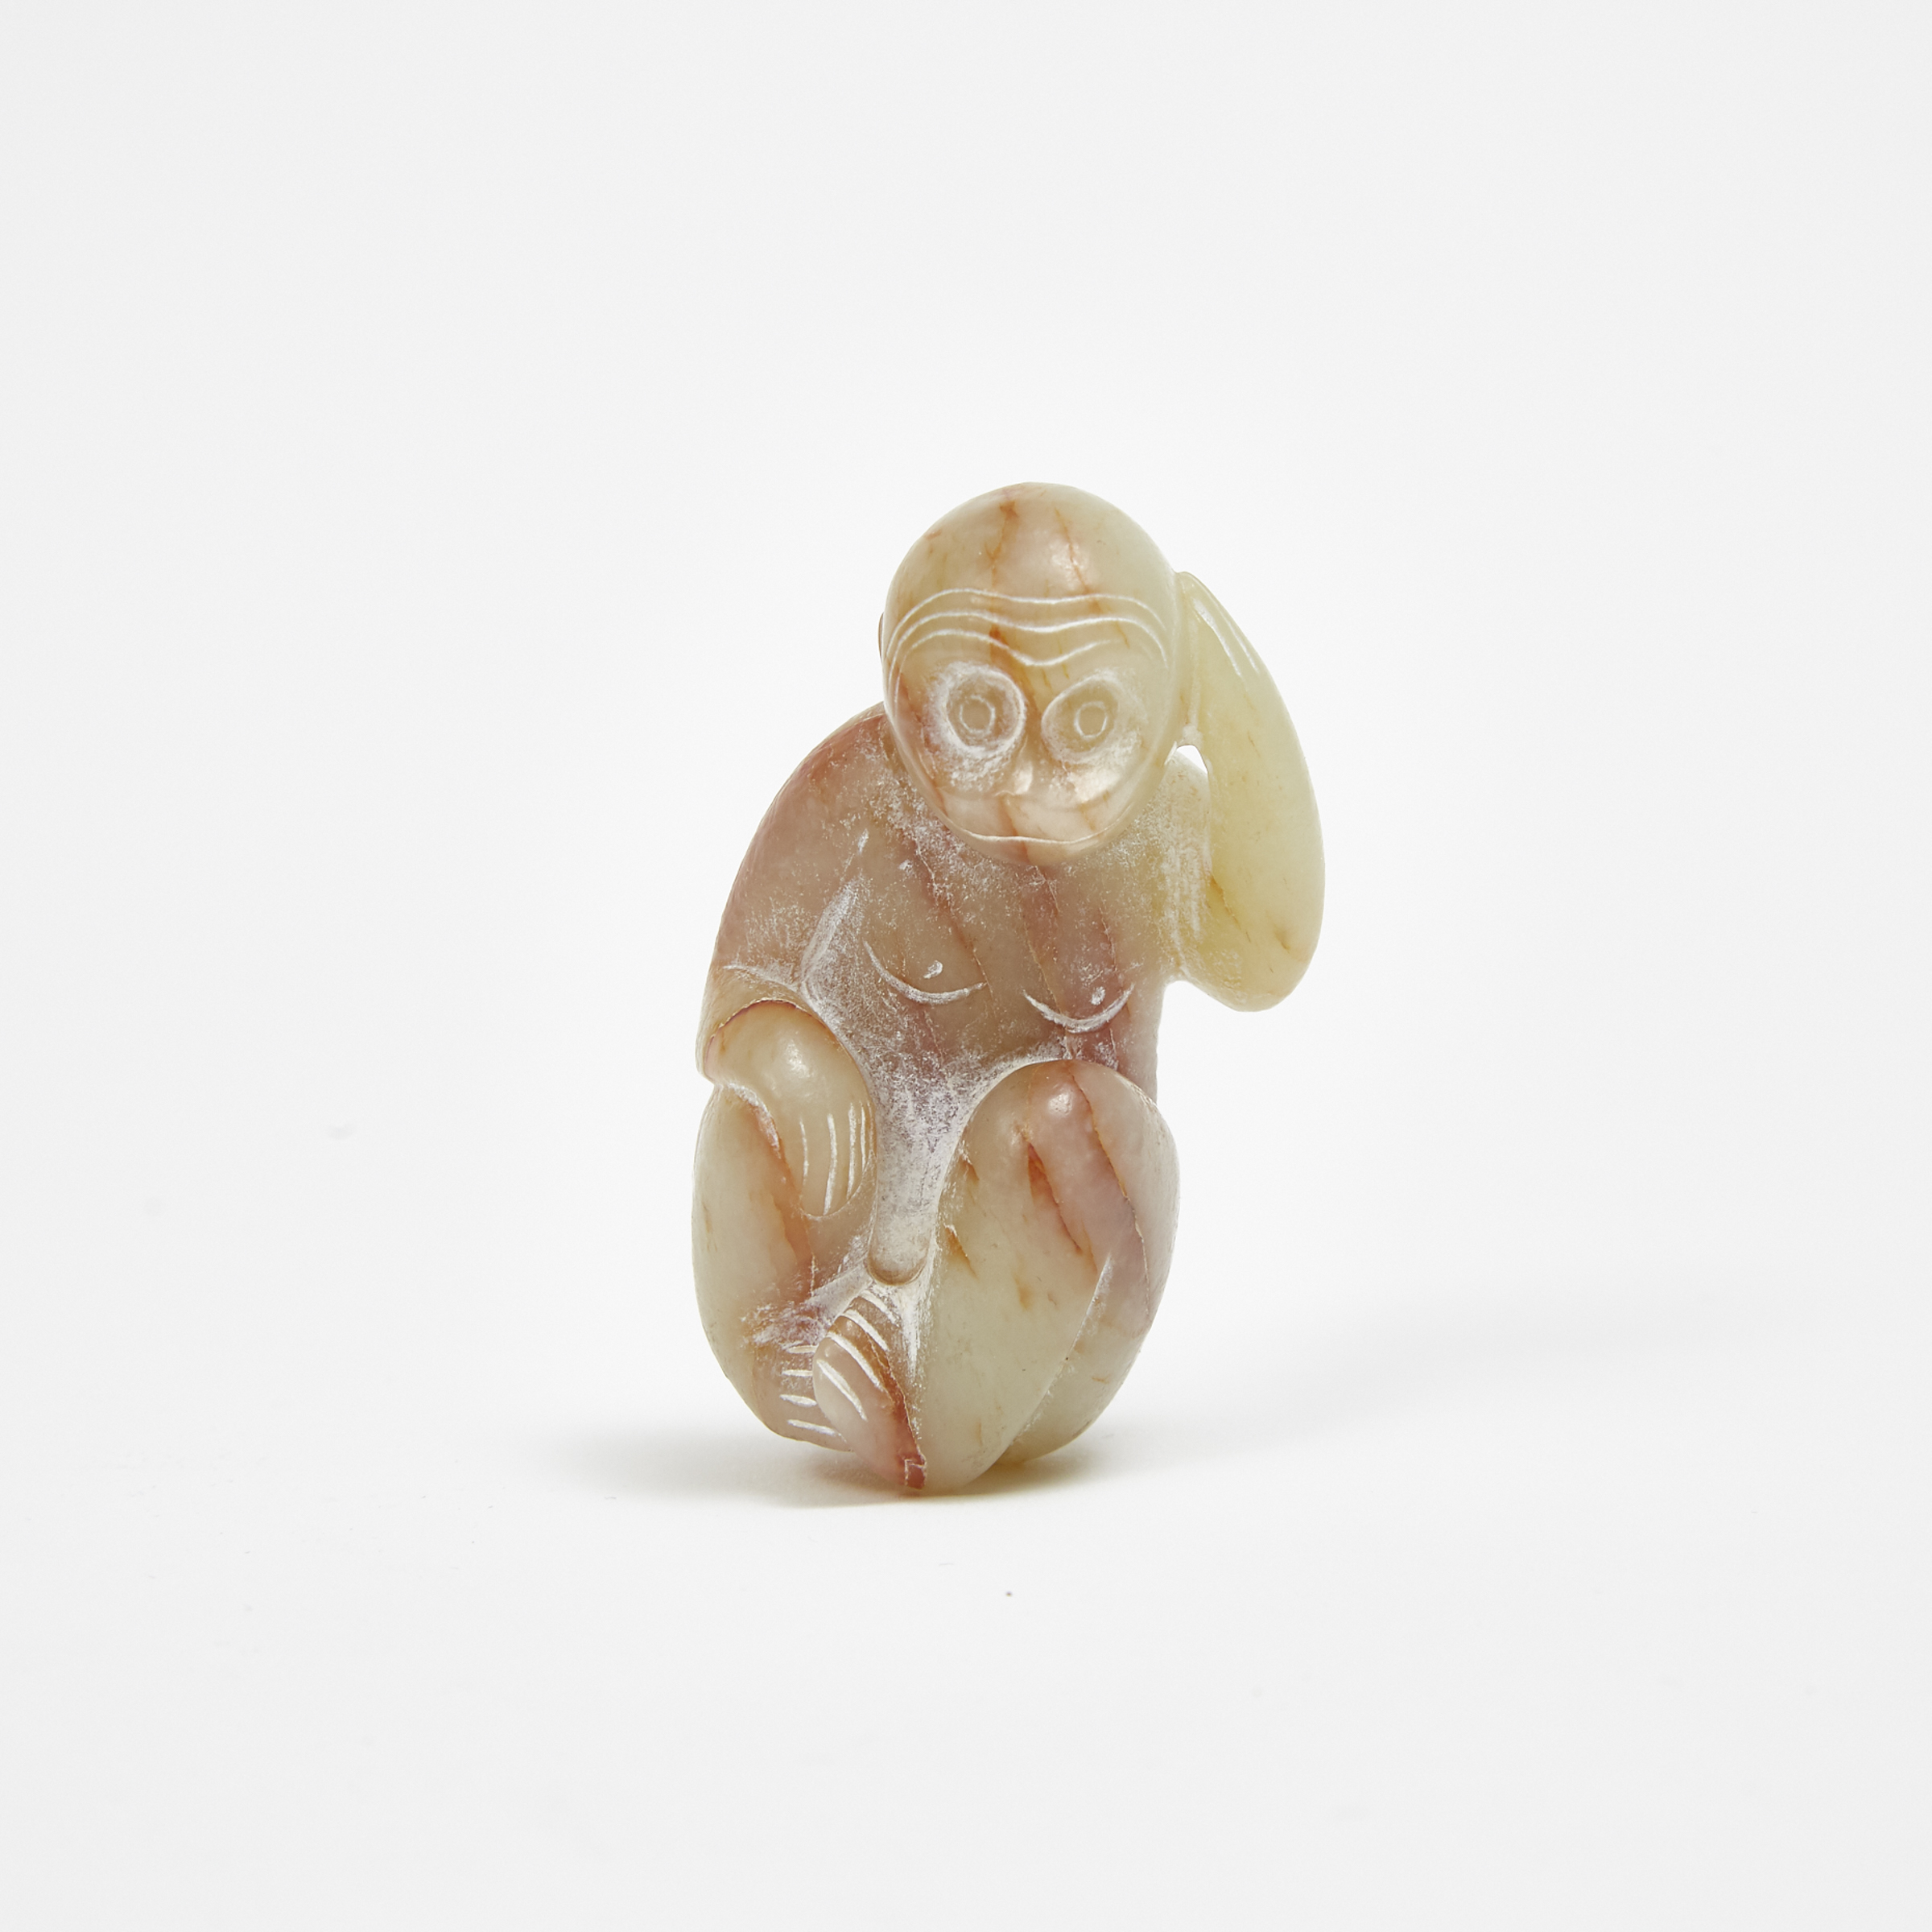 A White and Russet Stone Carving of a Monkey